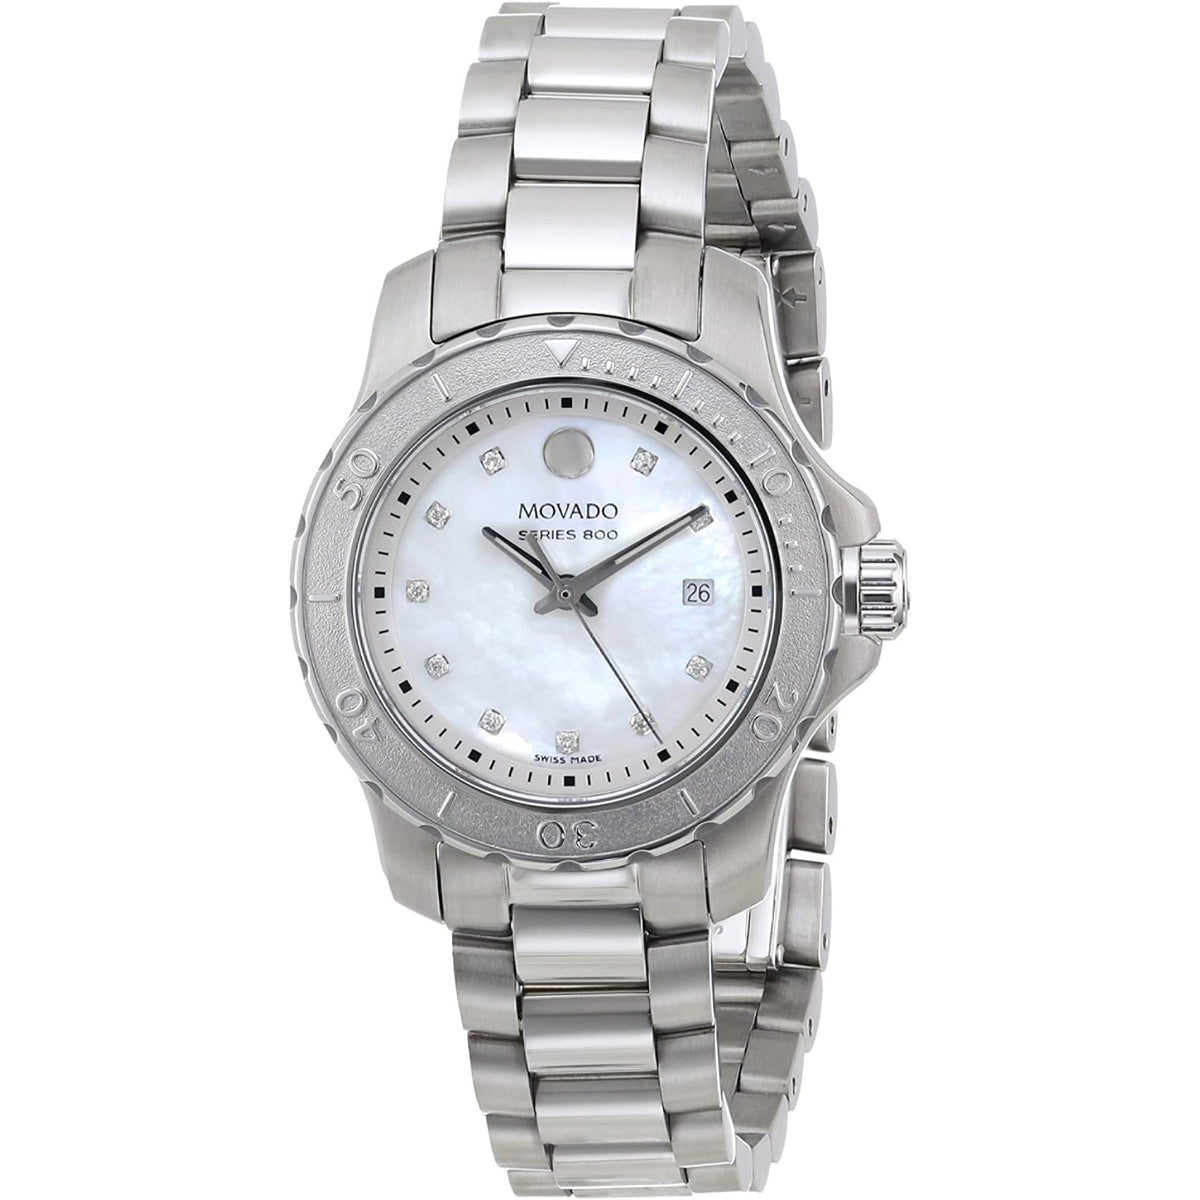 Movado Women&#39;s 2600114 Series 800 Stainless Steel Watch